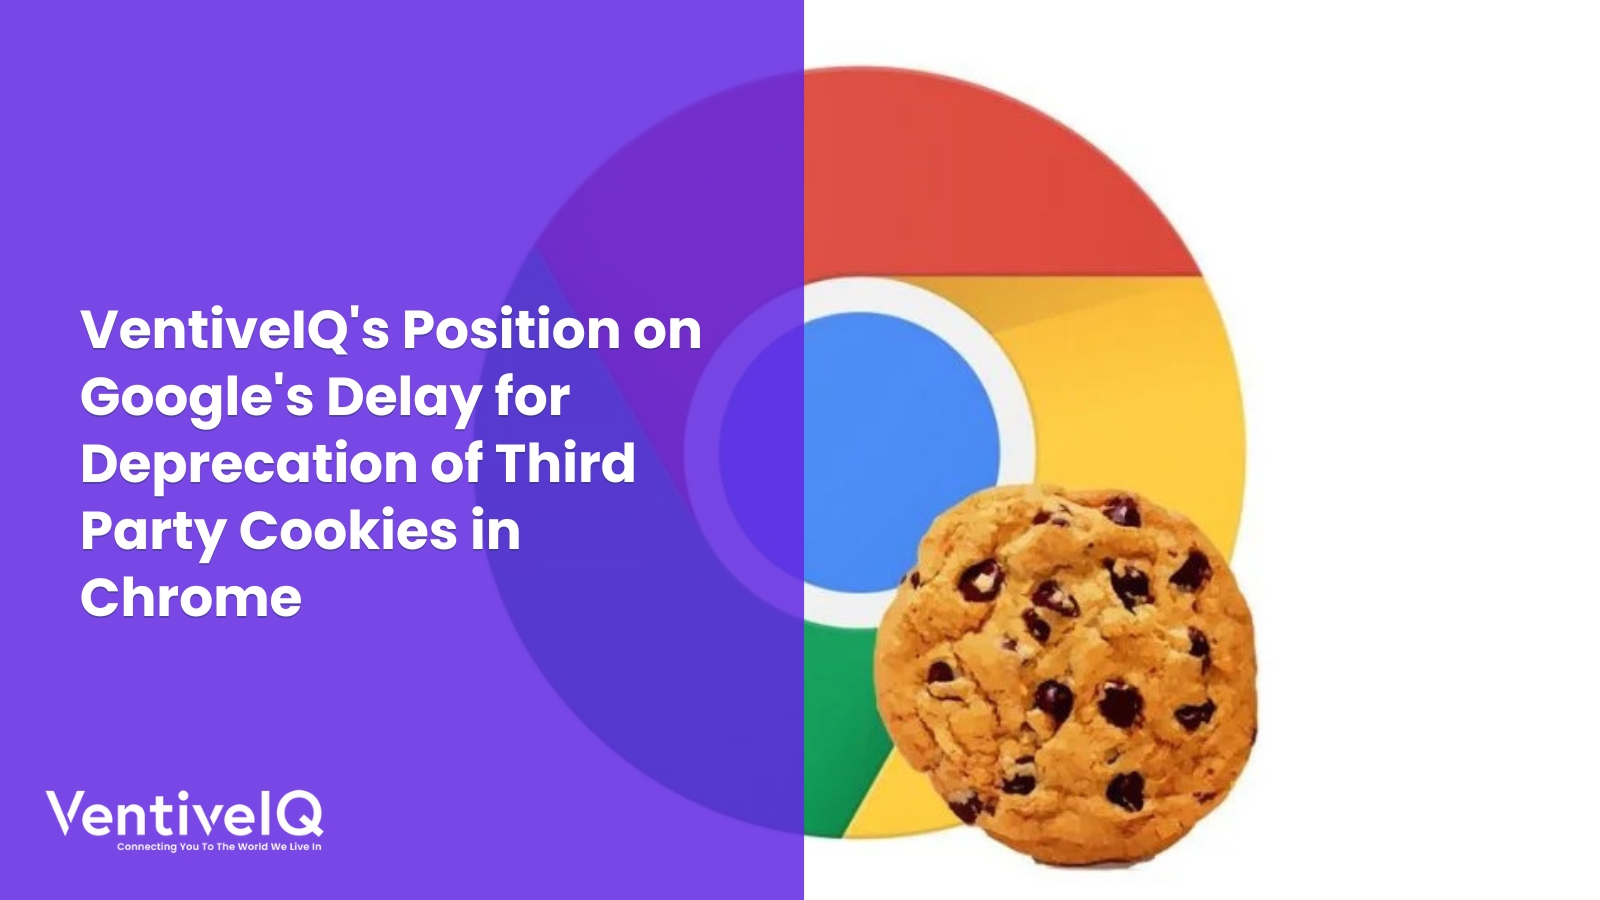 VentiveIQ’s Position on Google’s Delay for Deprecation of Third Party Cookies in Chrome